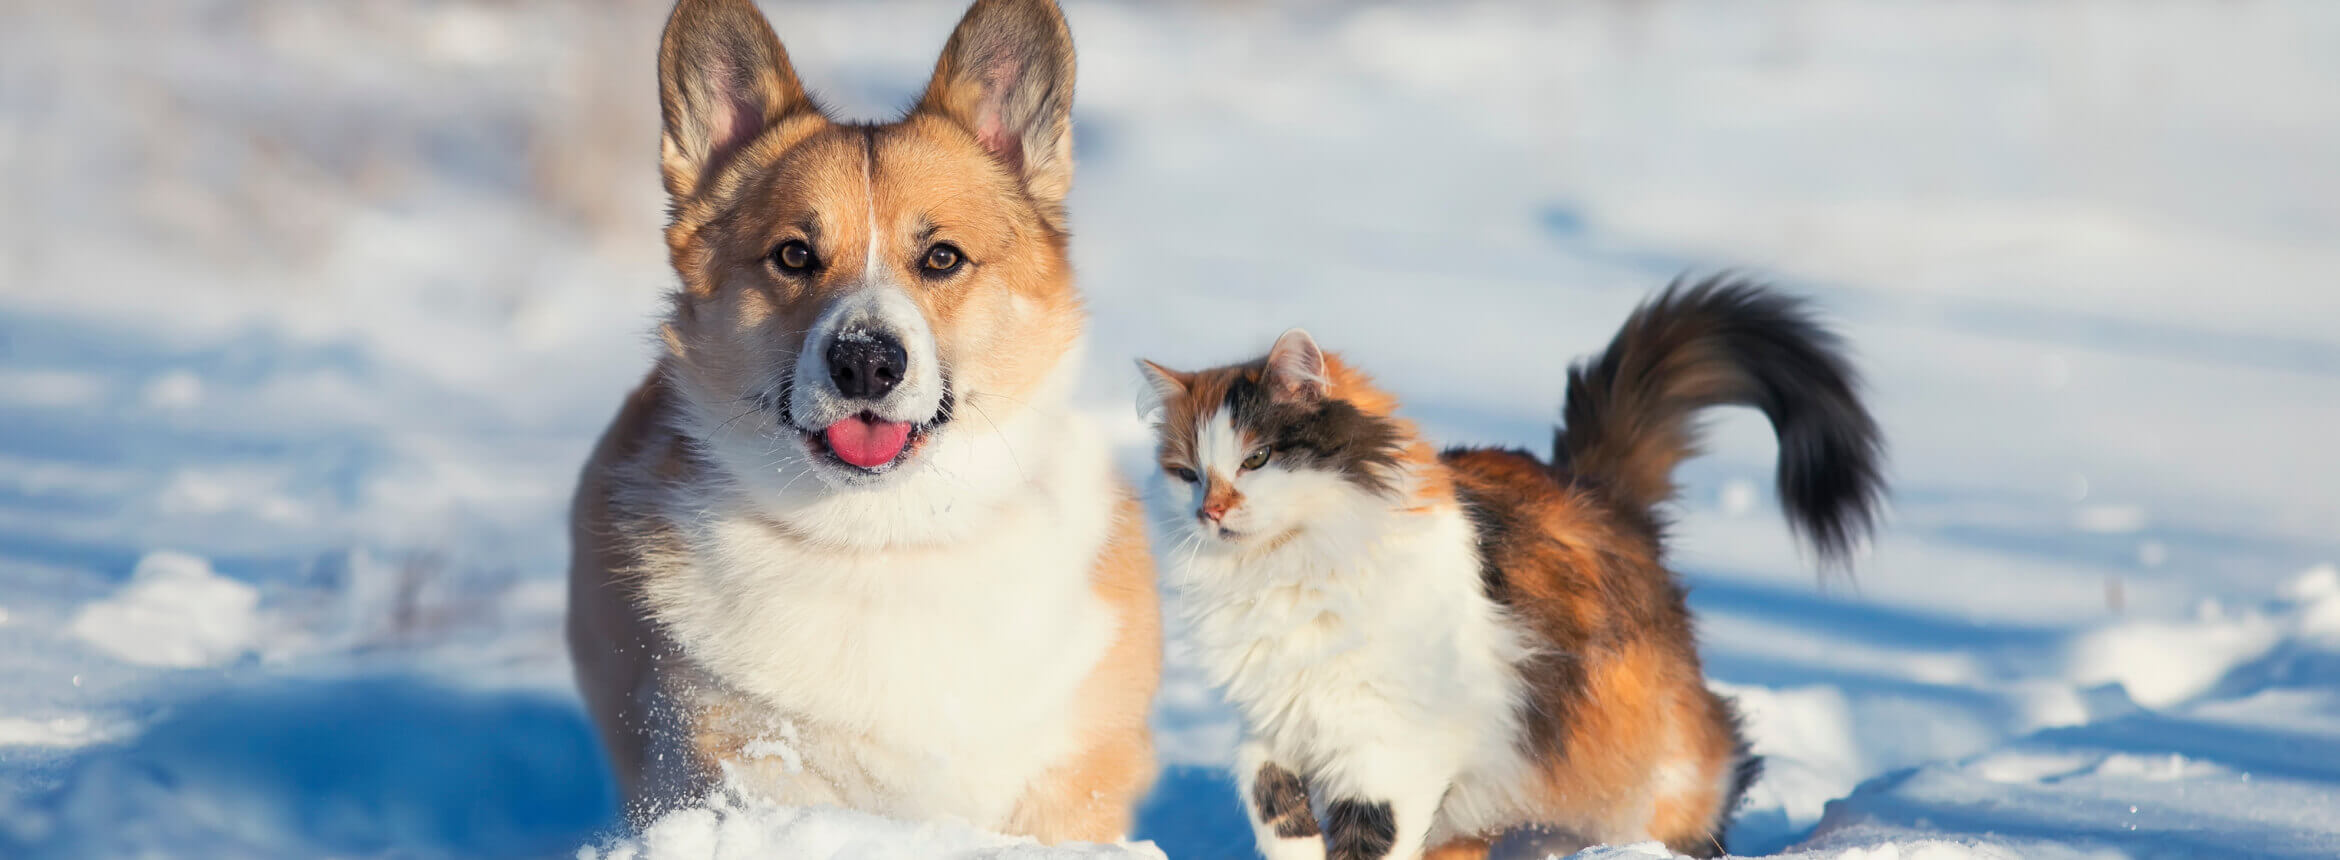 A dog and cat walking in the snow, enjoying a winter stroll together.